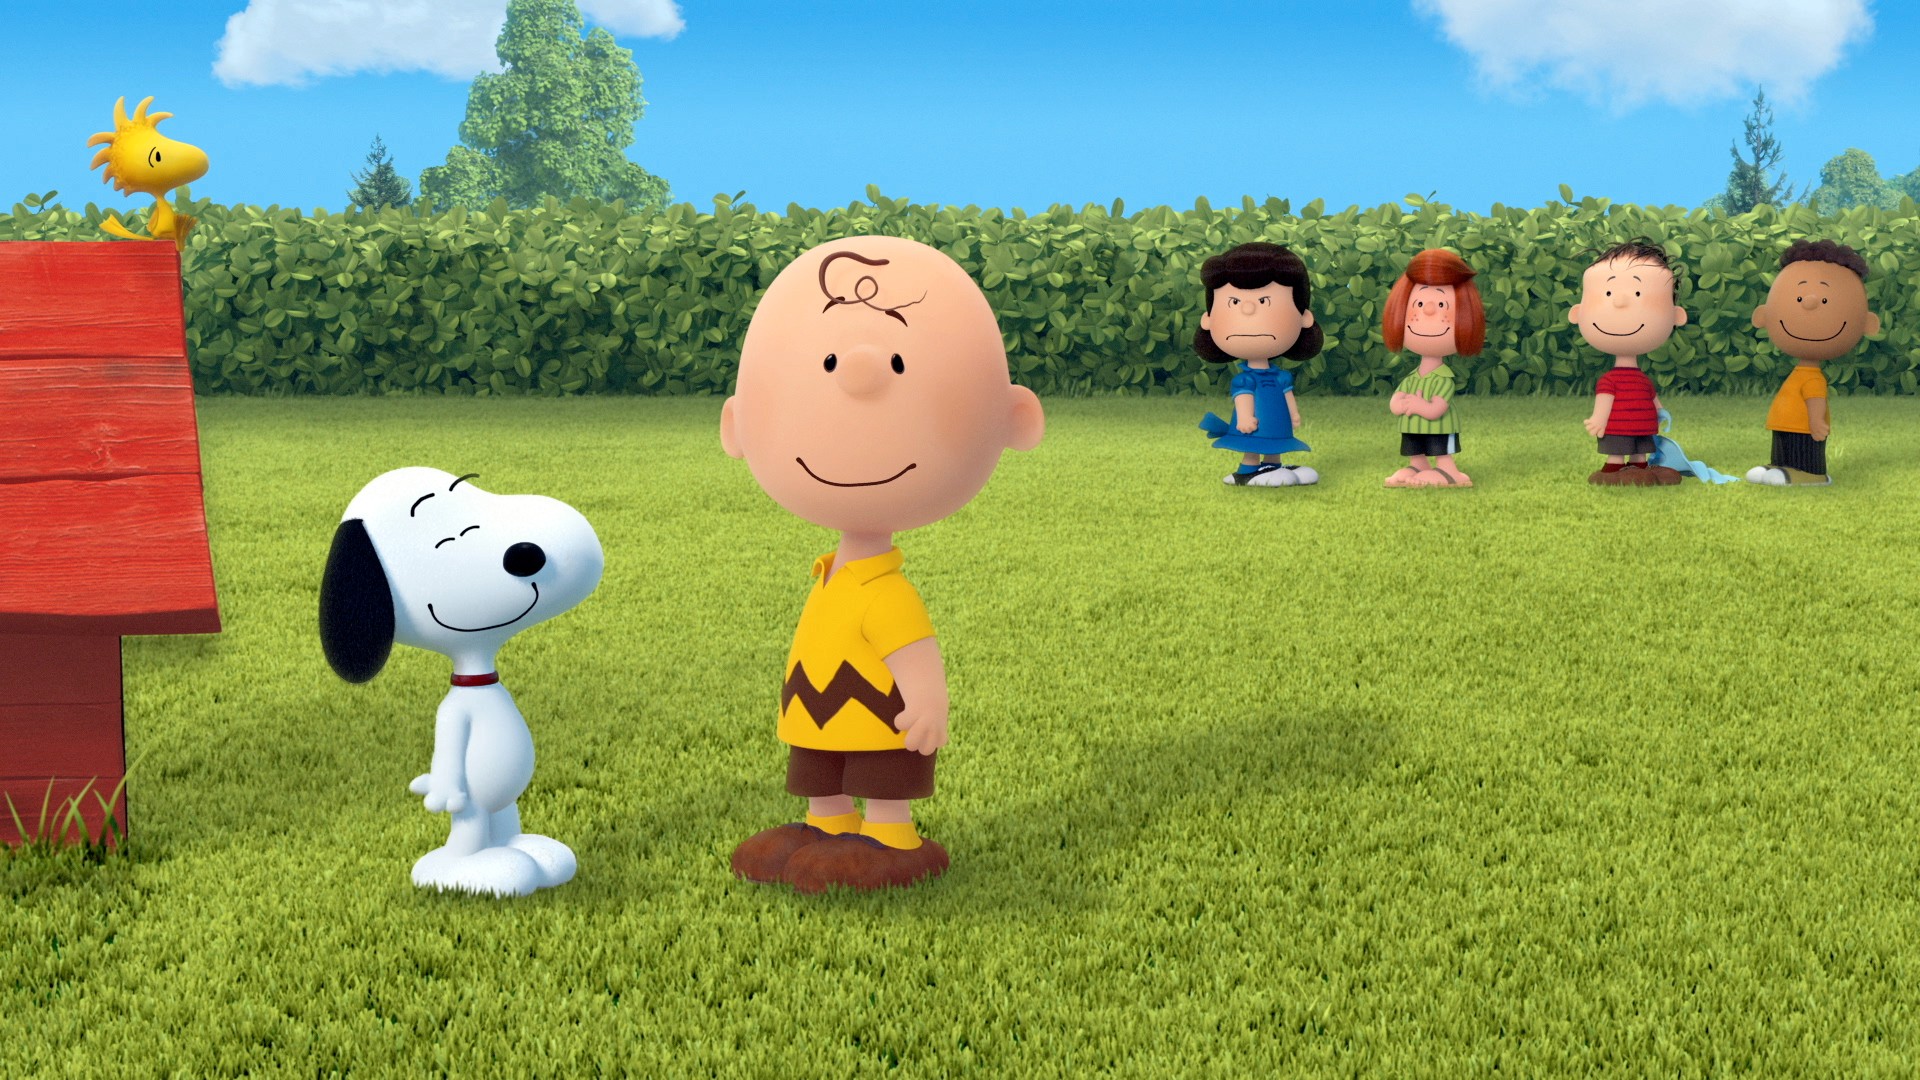 Meet Fifi, The Dog Of Snoopy's Dreams, In 'The Peanuts Movie' | HuffPost